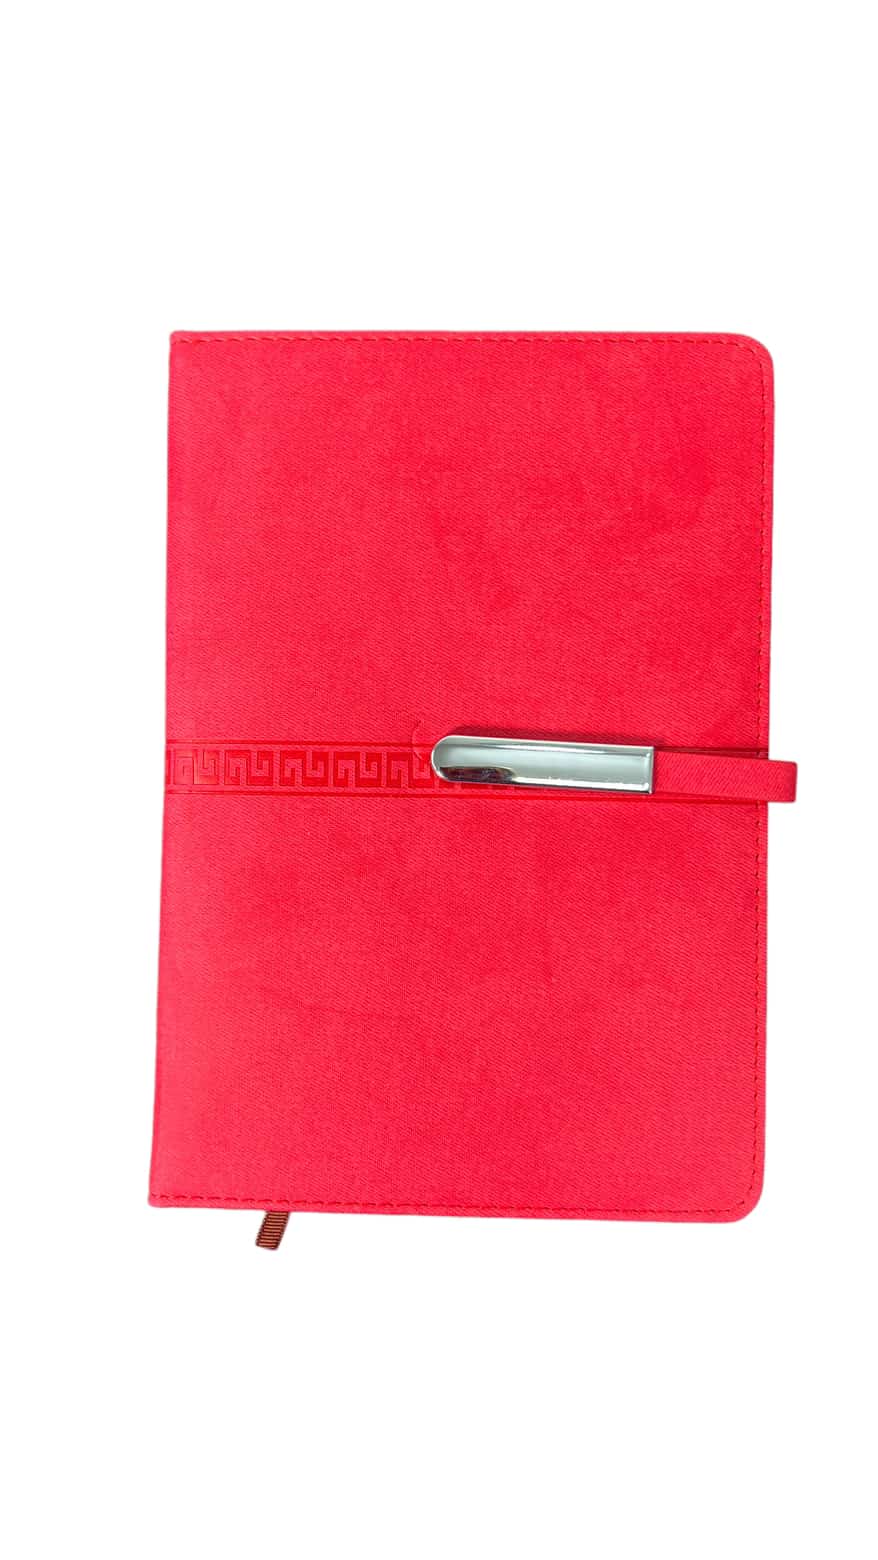 HARD COVER FABRIC JOURNAL